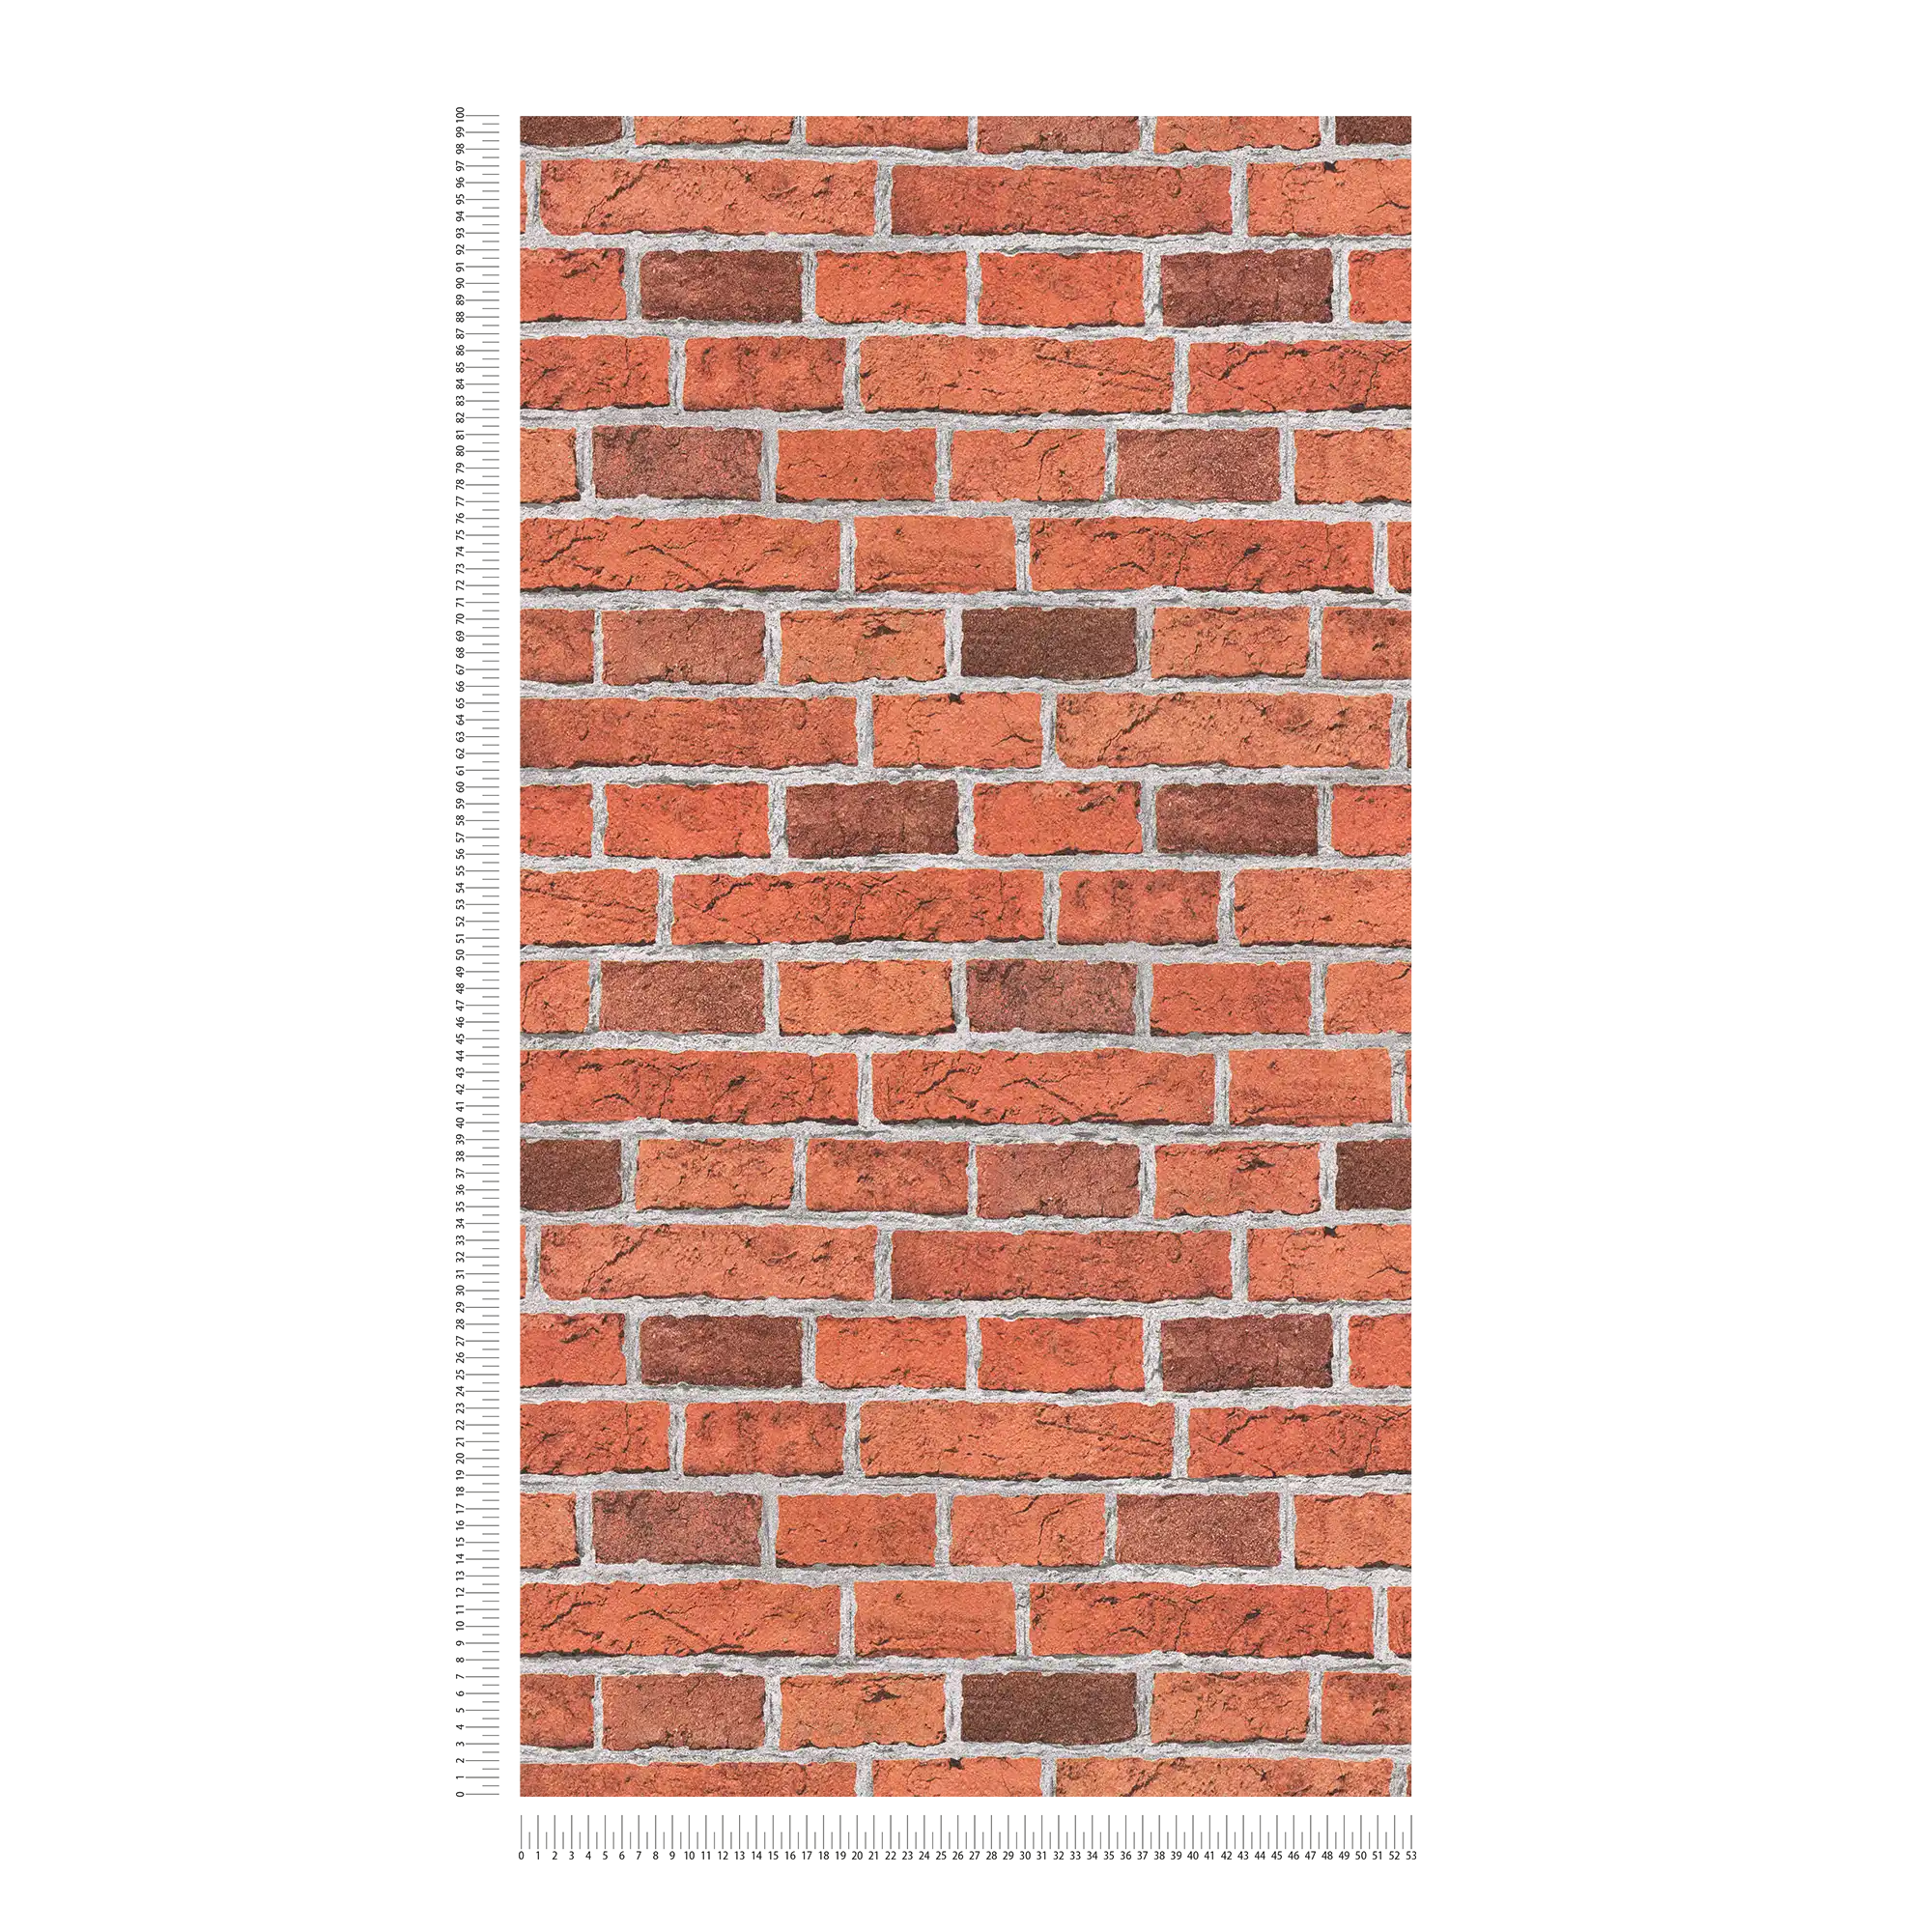             Stone wallpaper rustic with brick wall stylized - red, grey
        